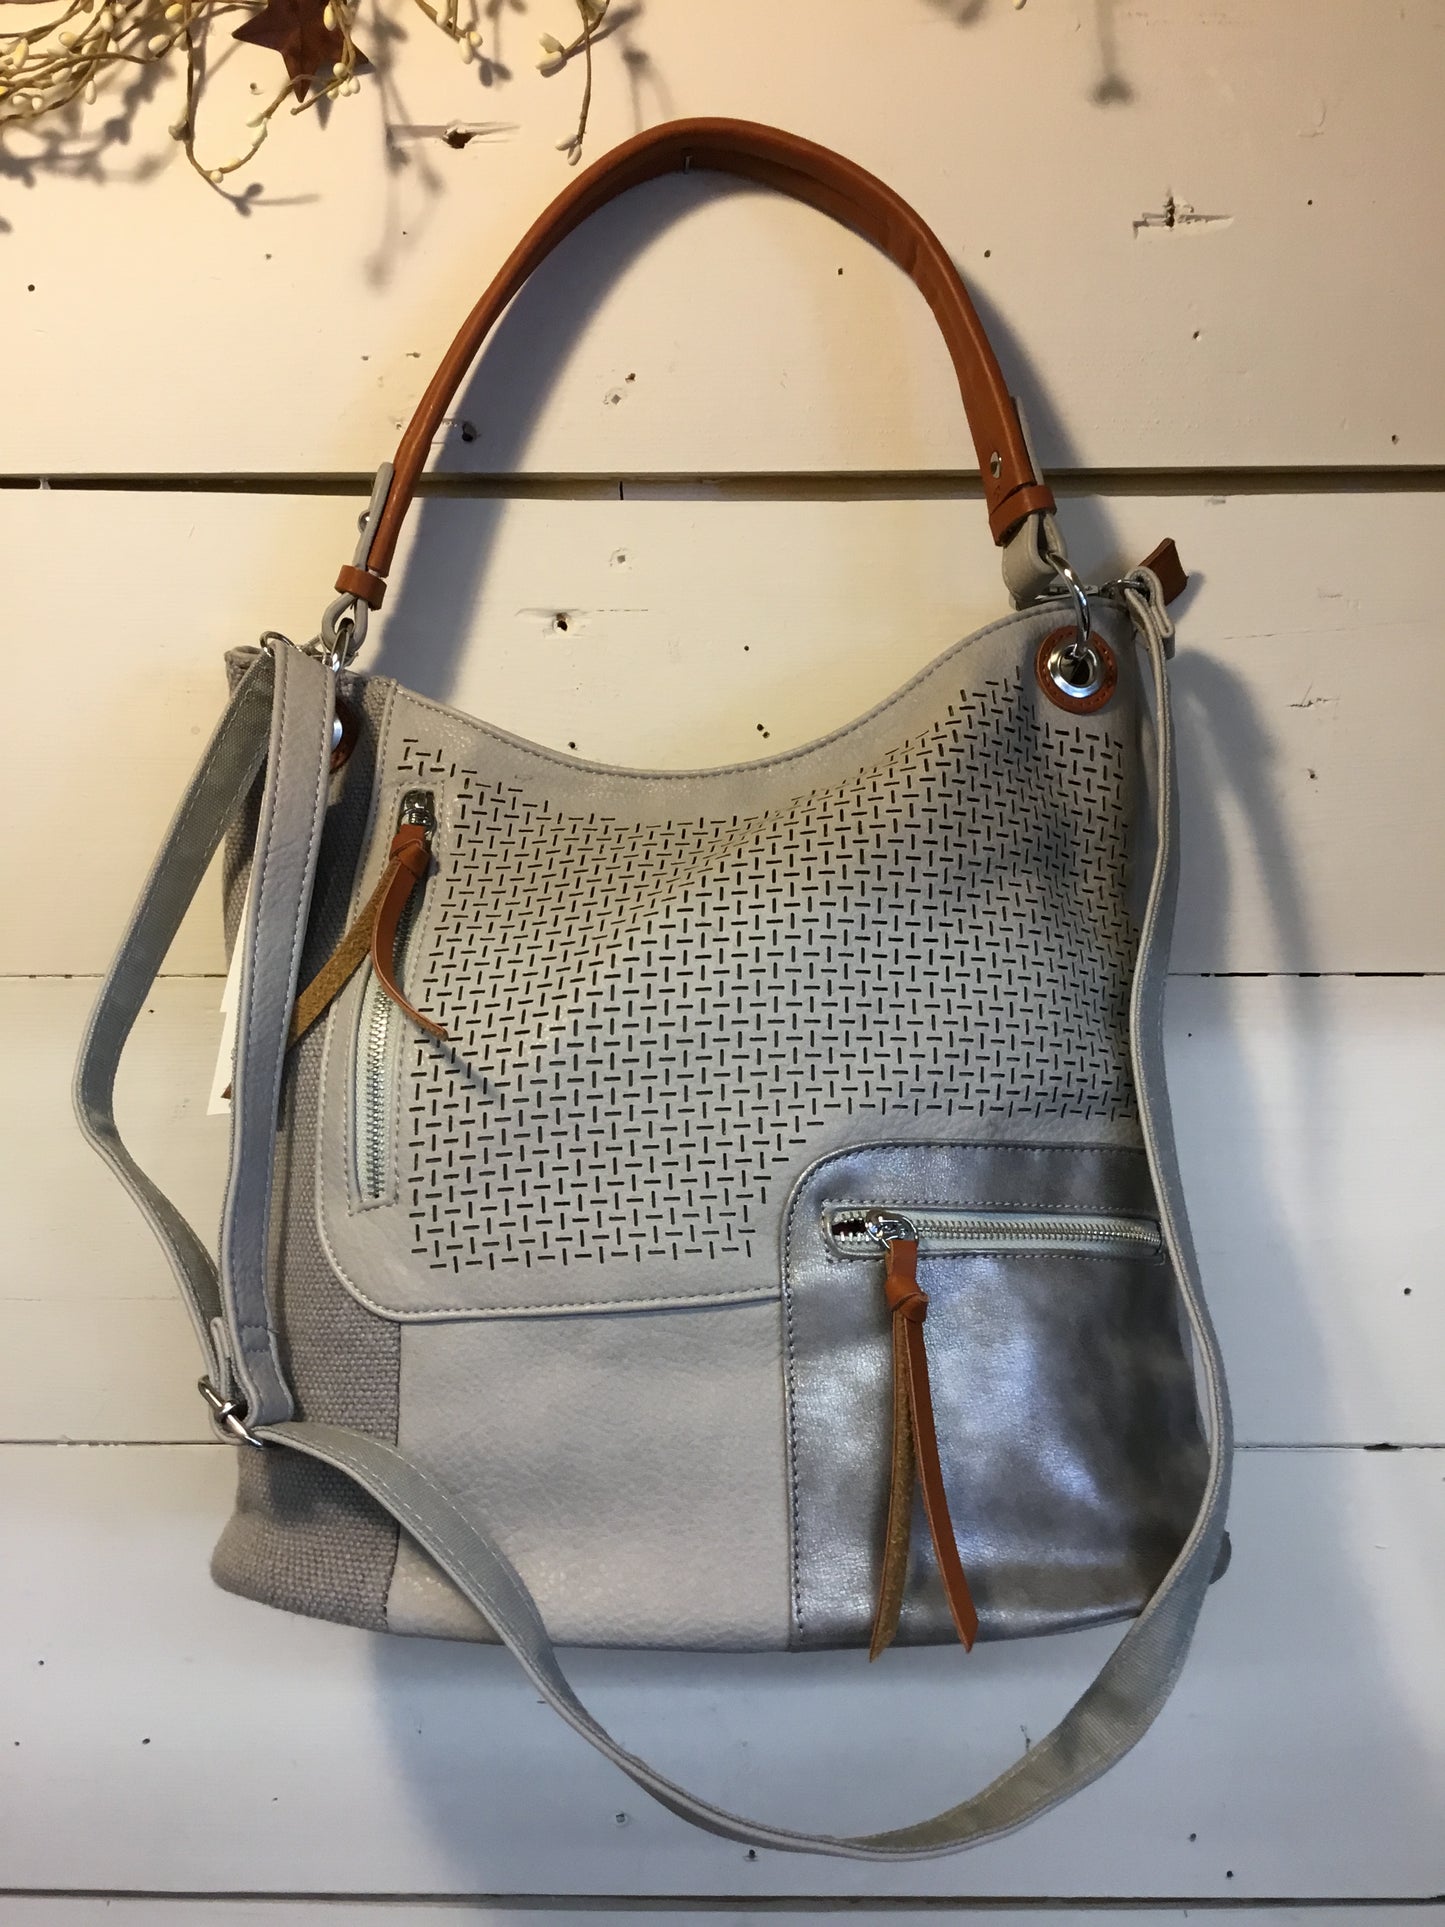 Shoulder Style Hobo Bag -Available in 3 colors